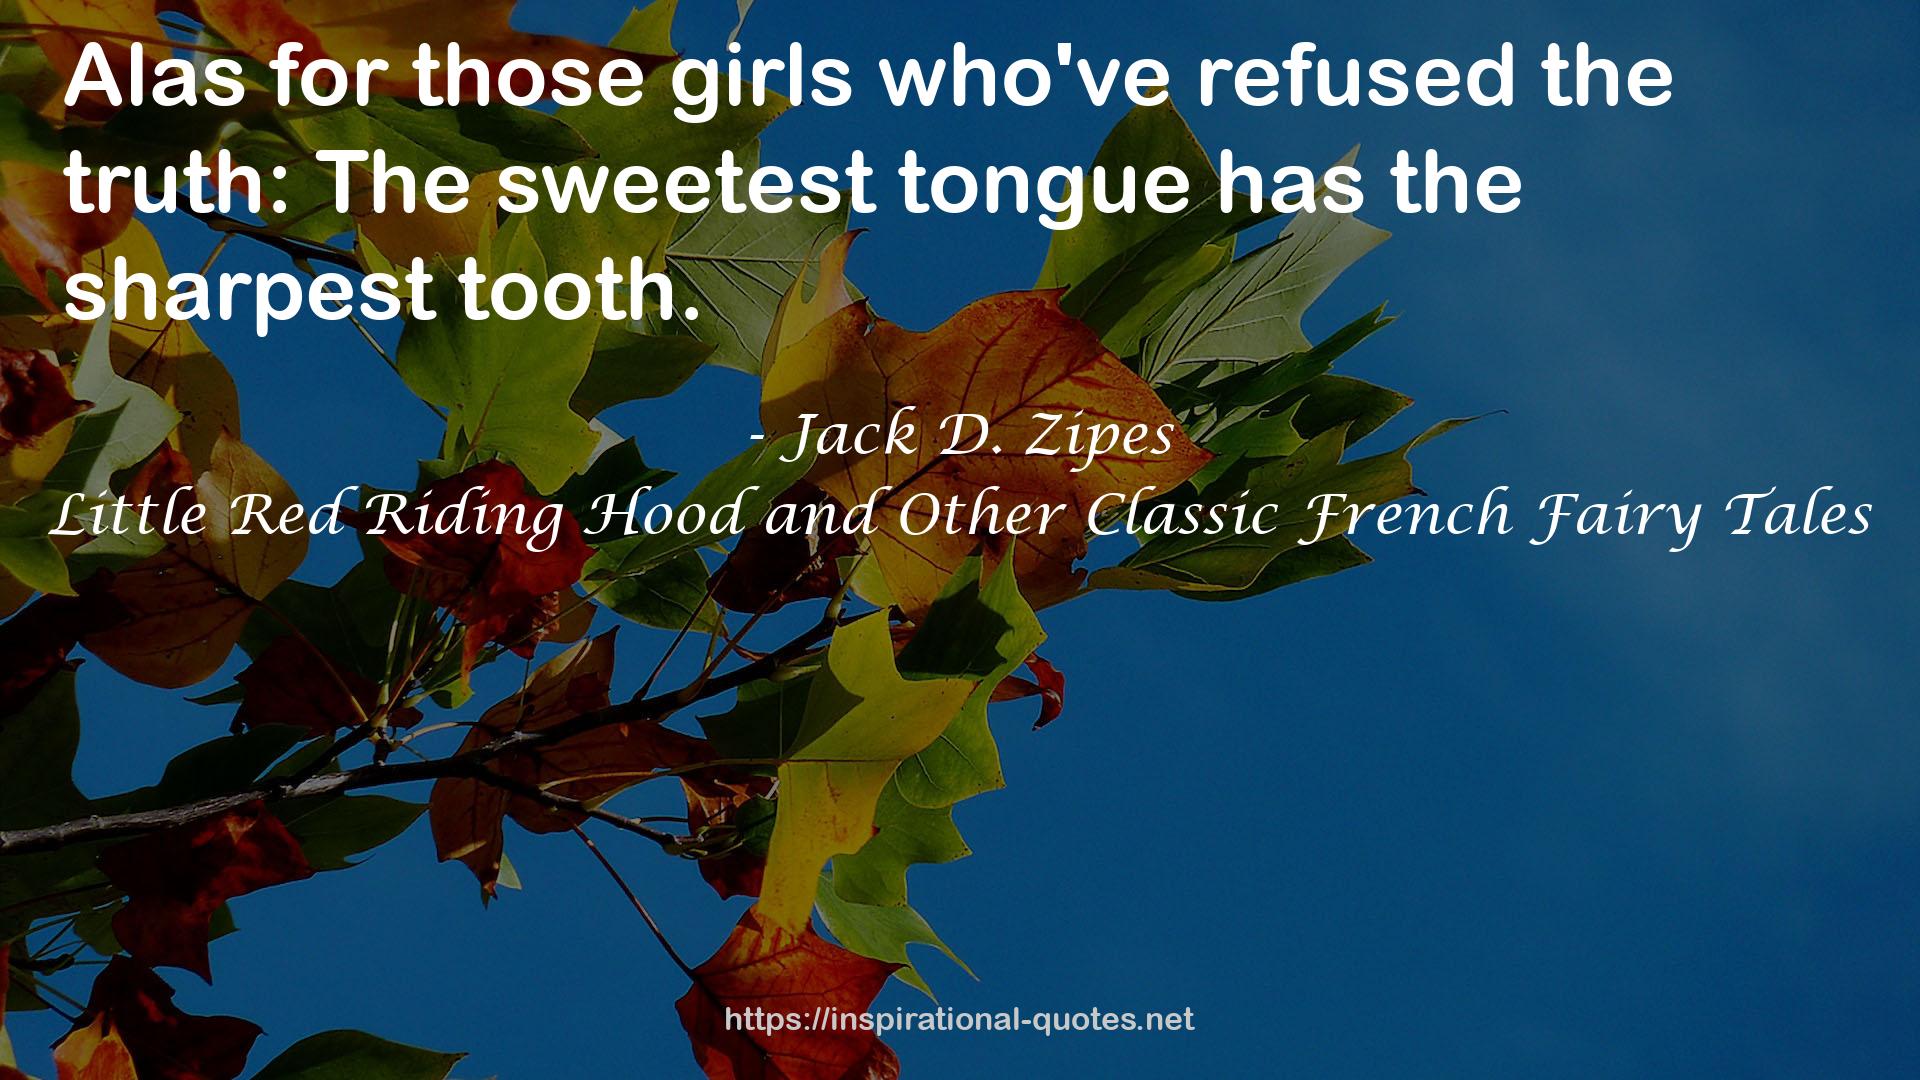 Little Red Riding Hood and Other Classic French Fairy Tales QUOTES